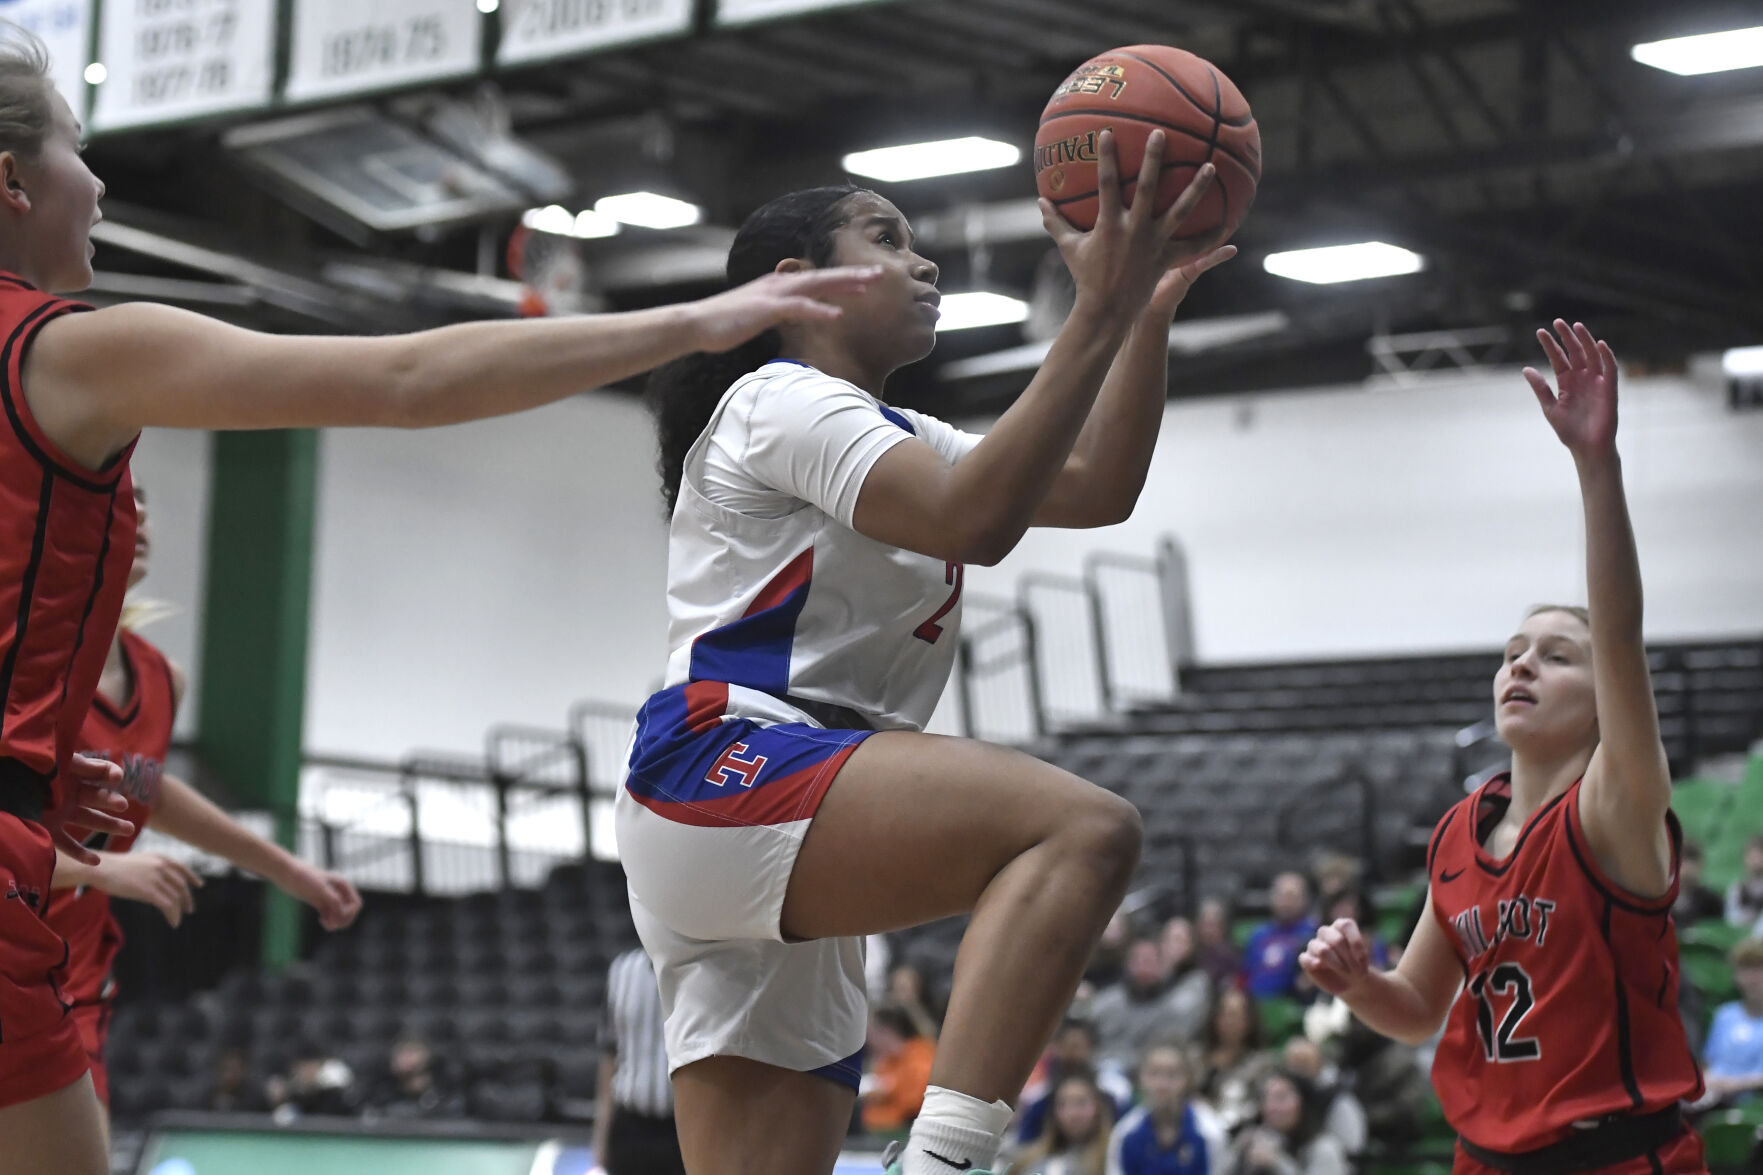 Tremper Girls Basketball Squad Sets Sights on Southeast Conference Title